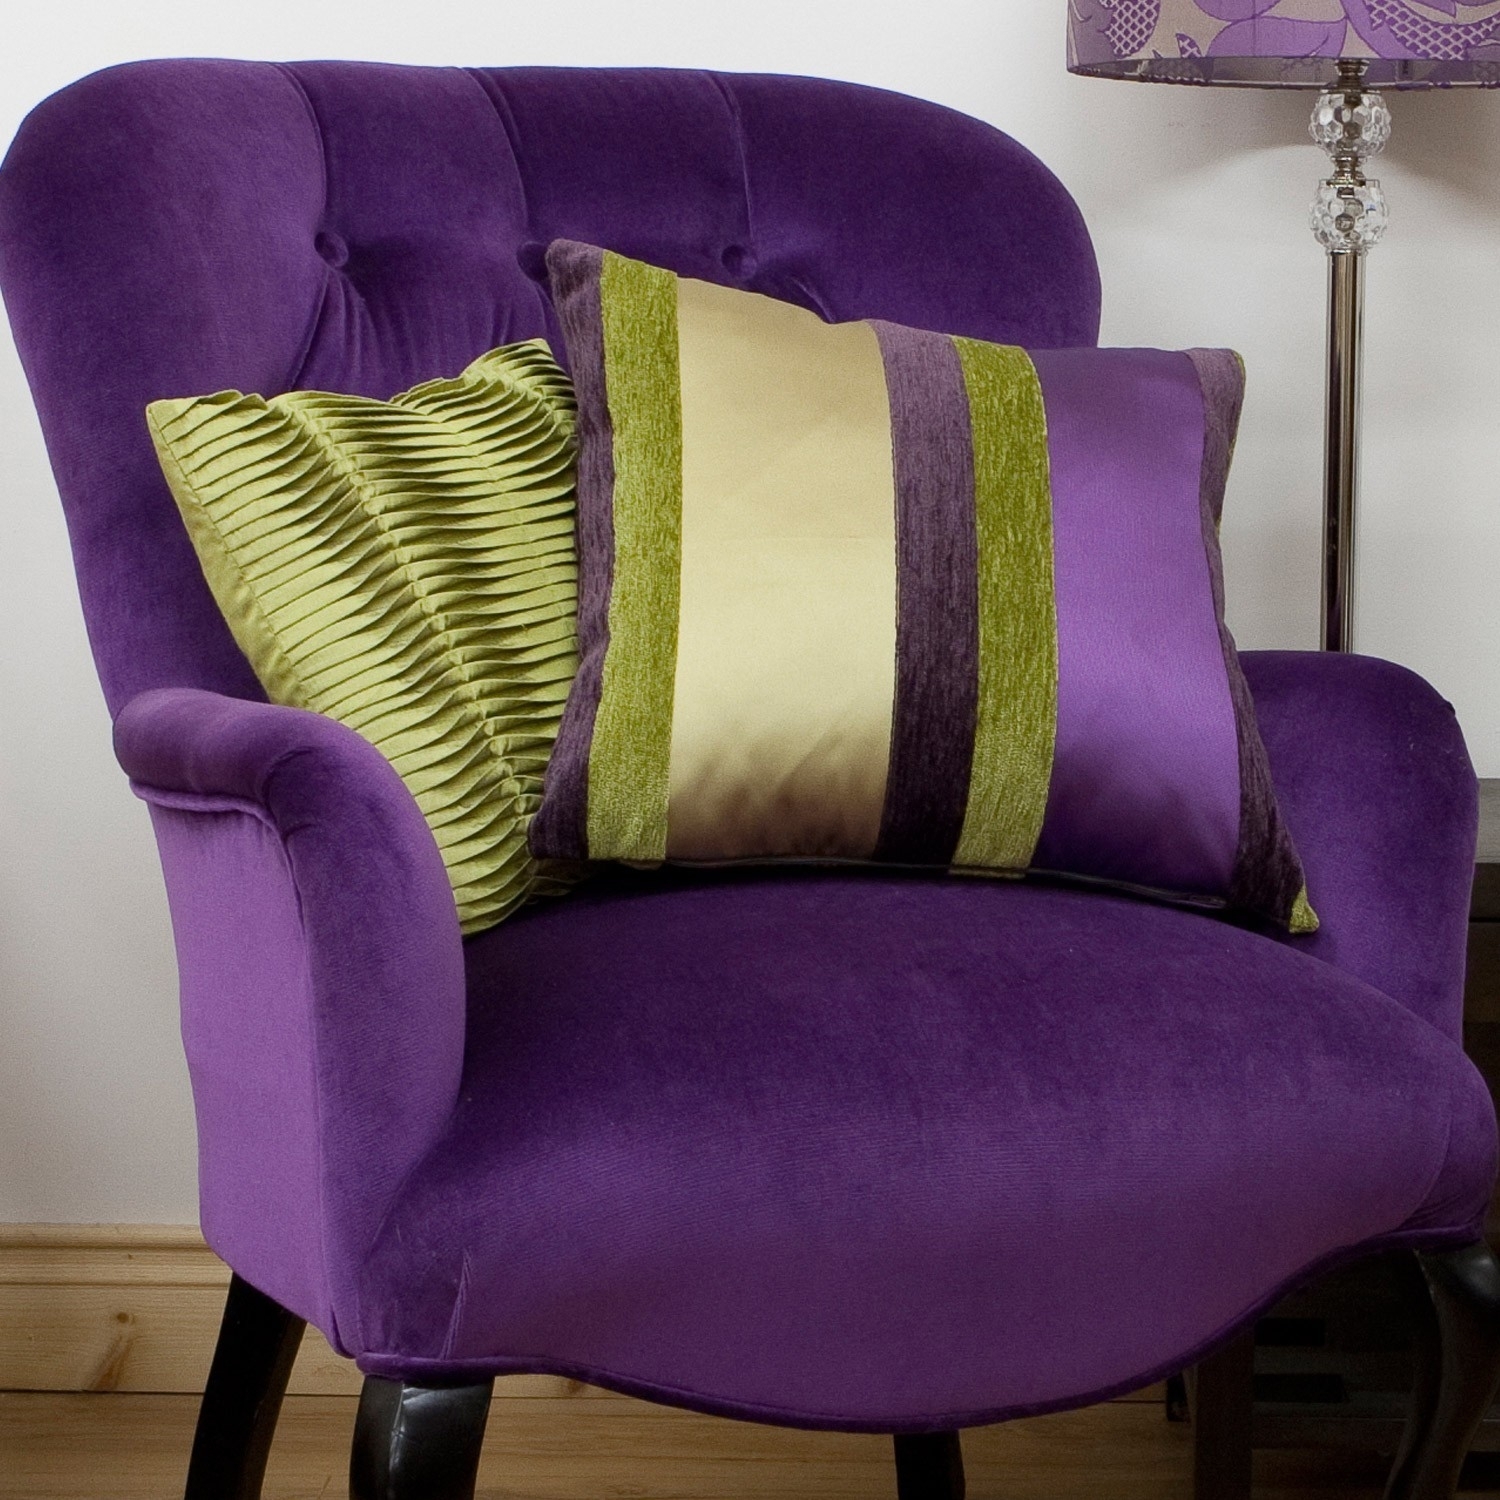 Unusual Armchairs - Foter